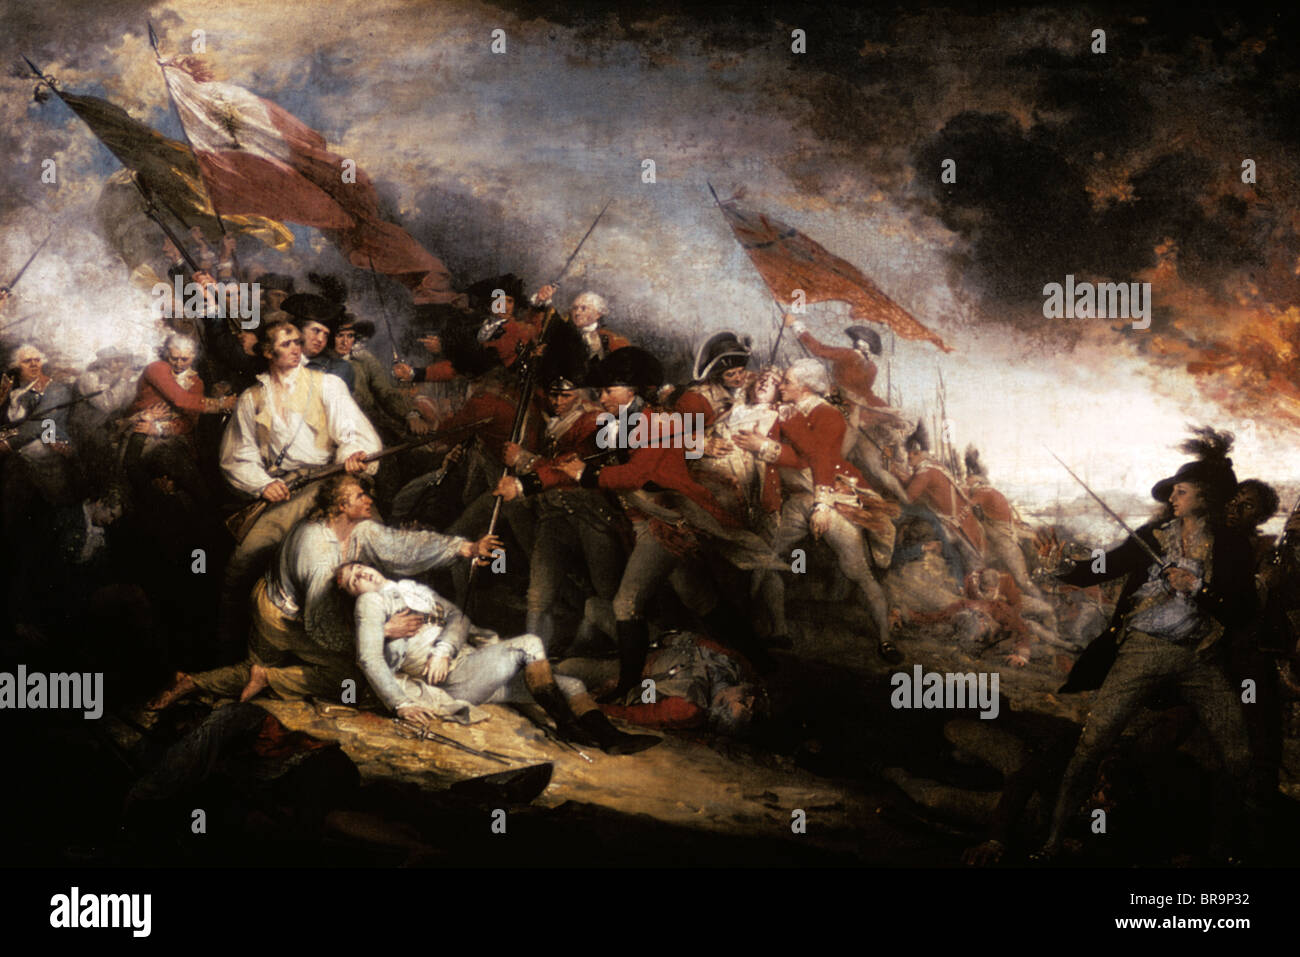 JOHN TRUMBULL OIL PAINTING OF THE DEATH OF GENERAL WARREN AT THE BATTLE OF BUNKER HILL Stock Photo